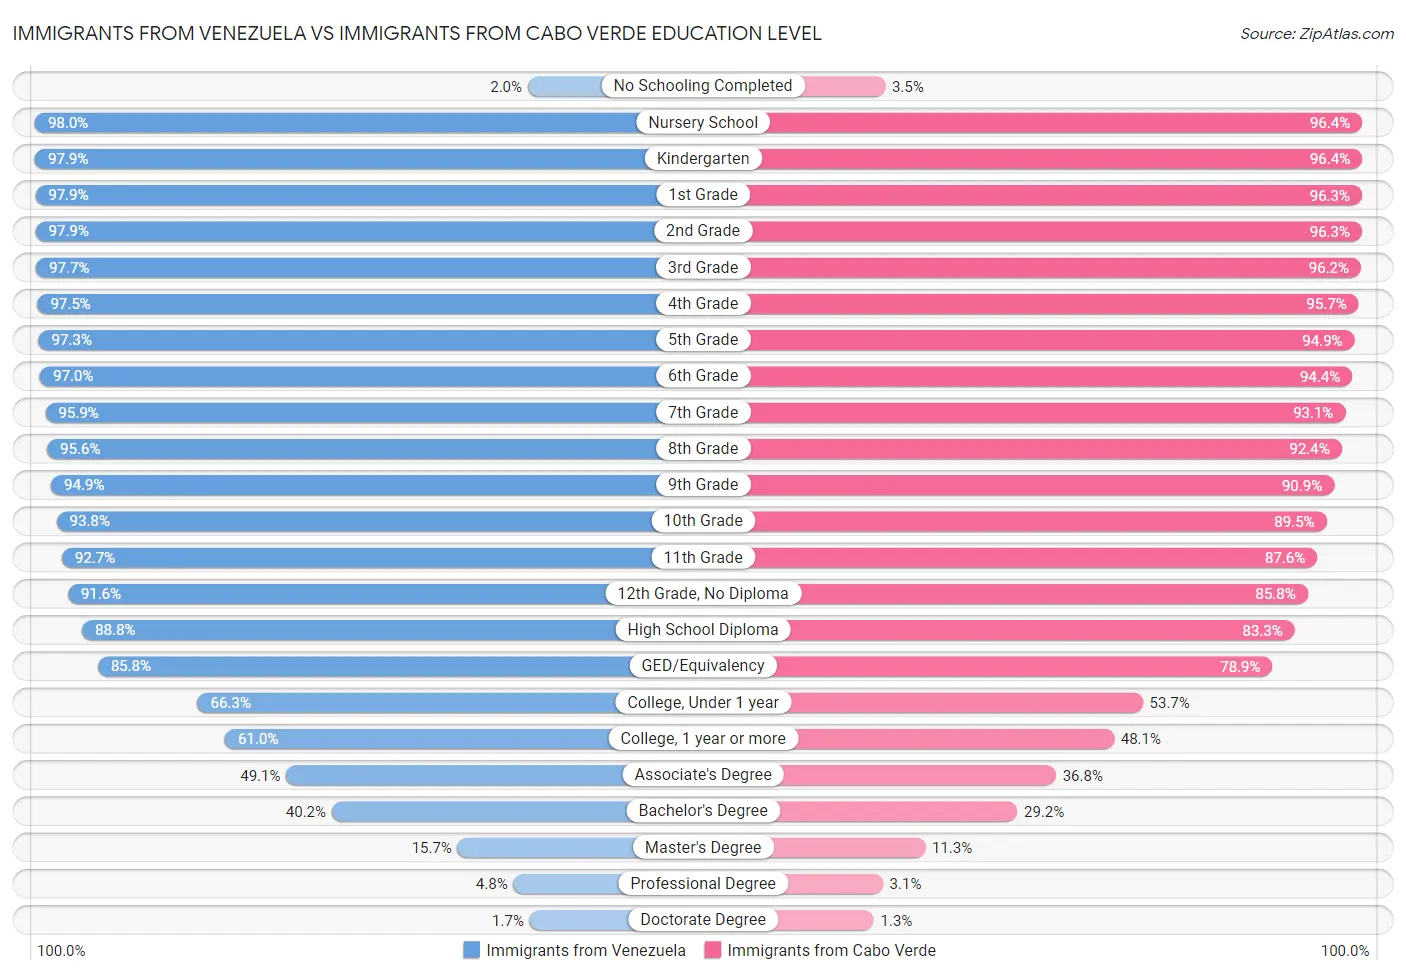 Immigrants from Venezuela vs Immigrants from Cabo Verde Education Level